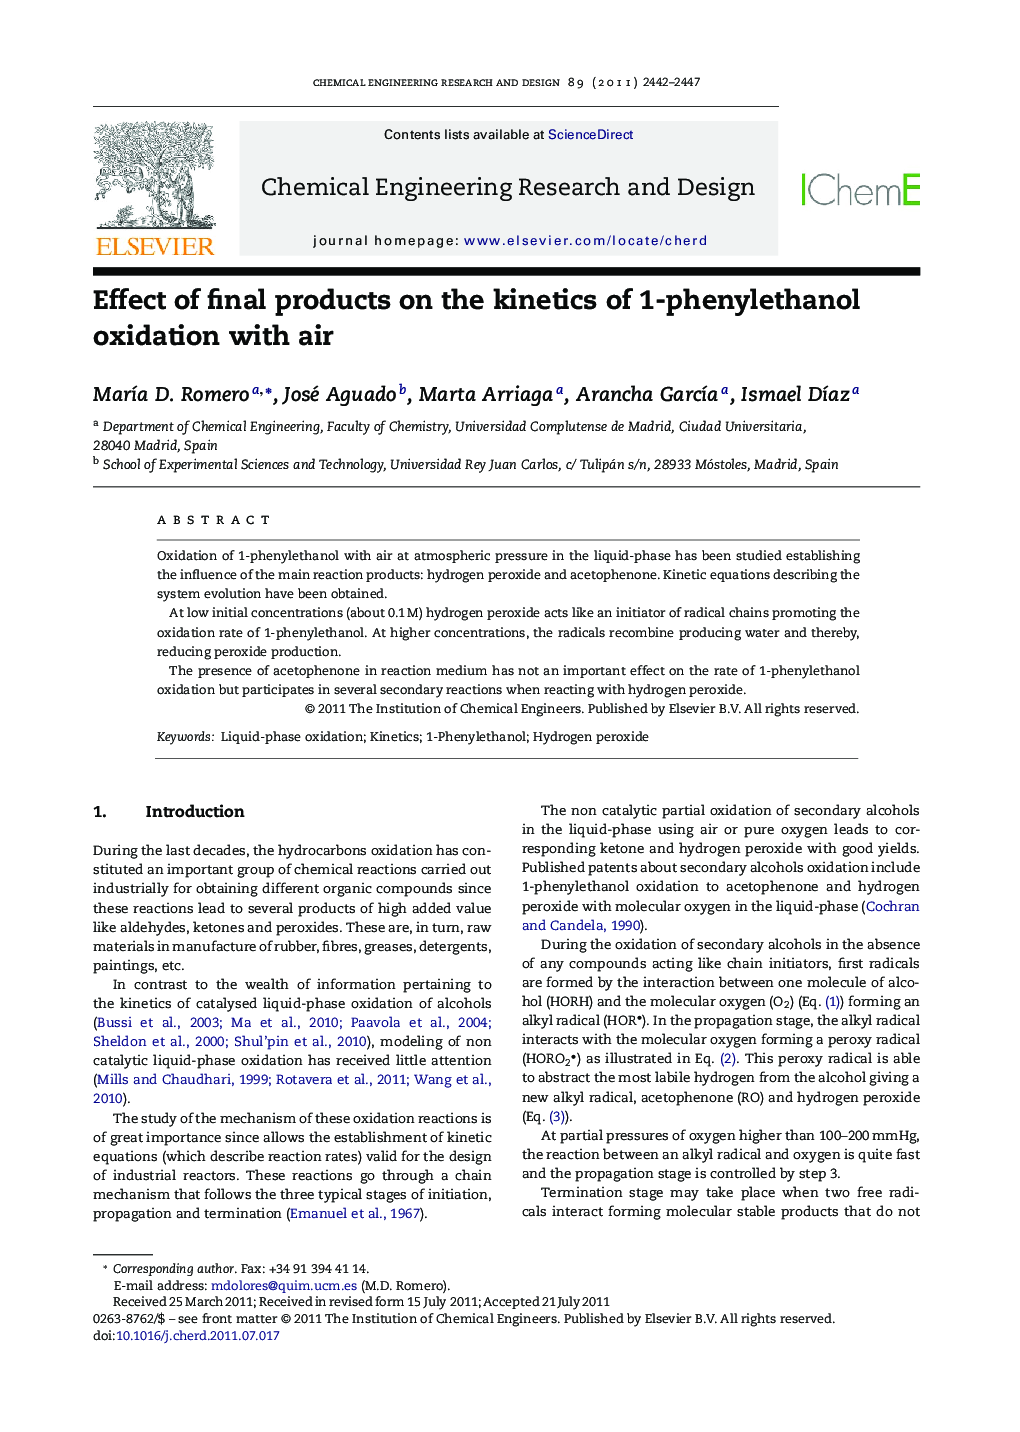 Effect of final products on the kinetics of 1-phenylethanol oxidation with air